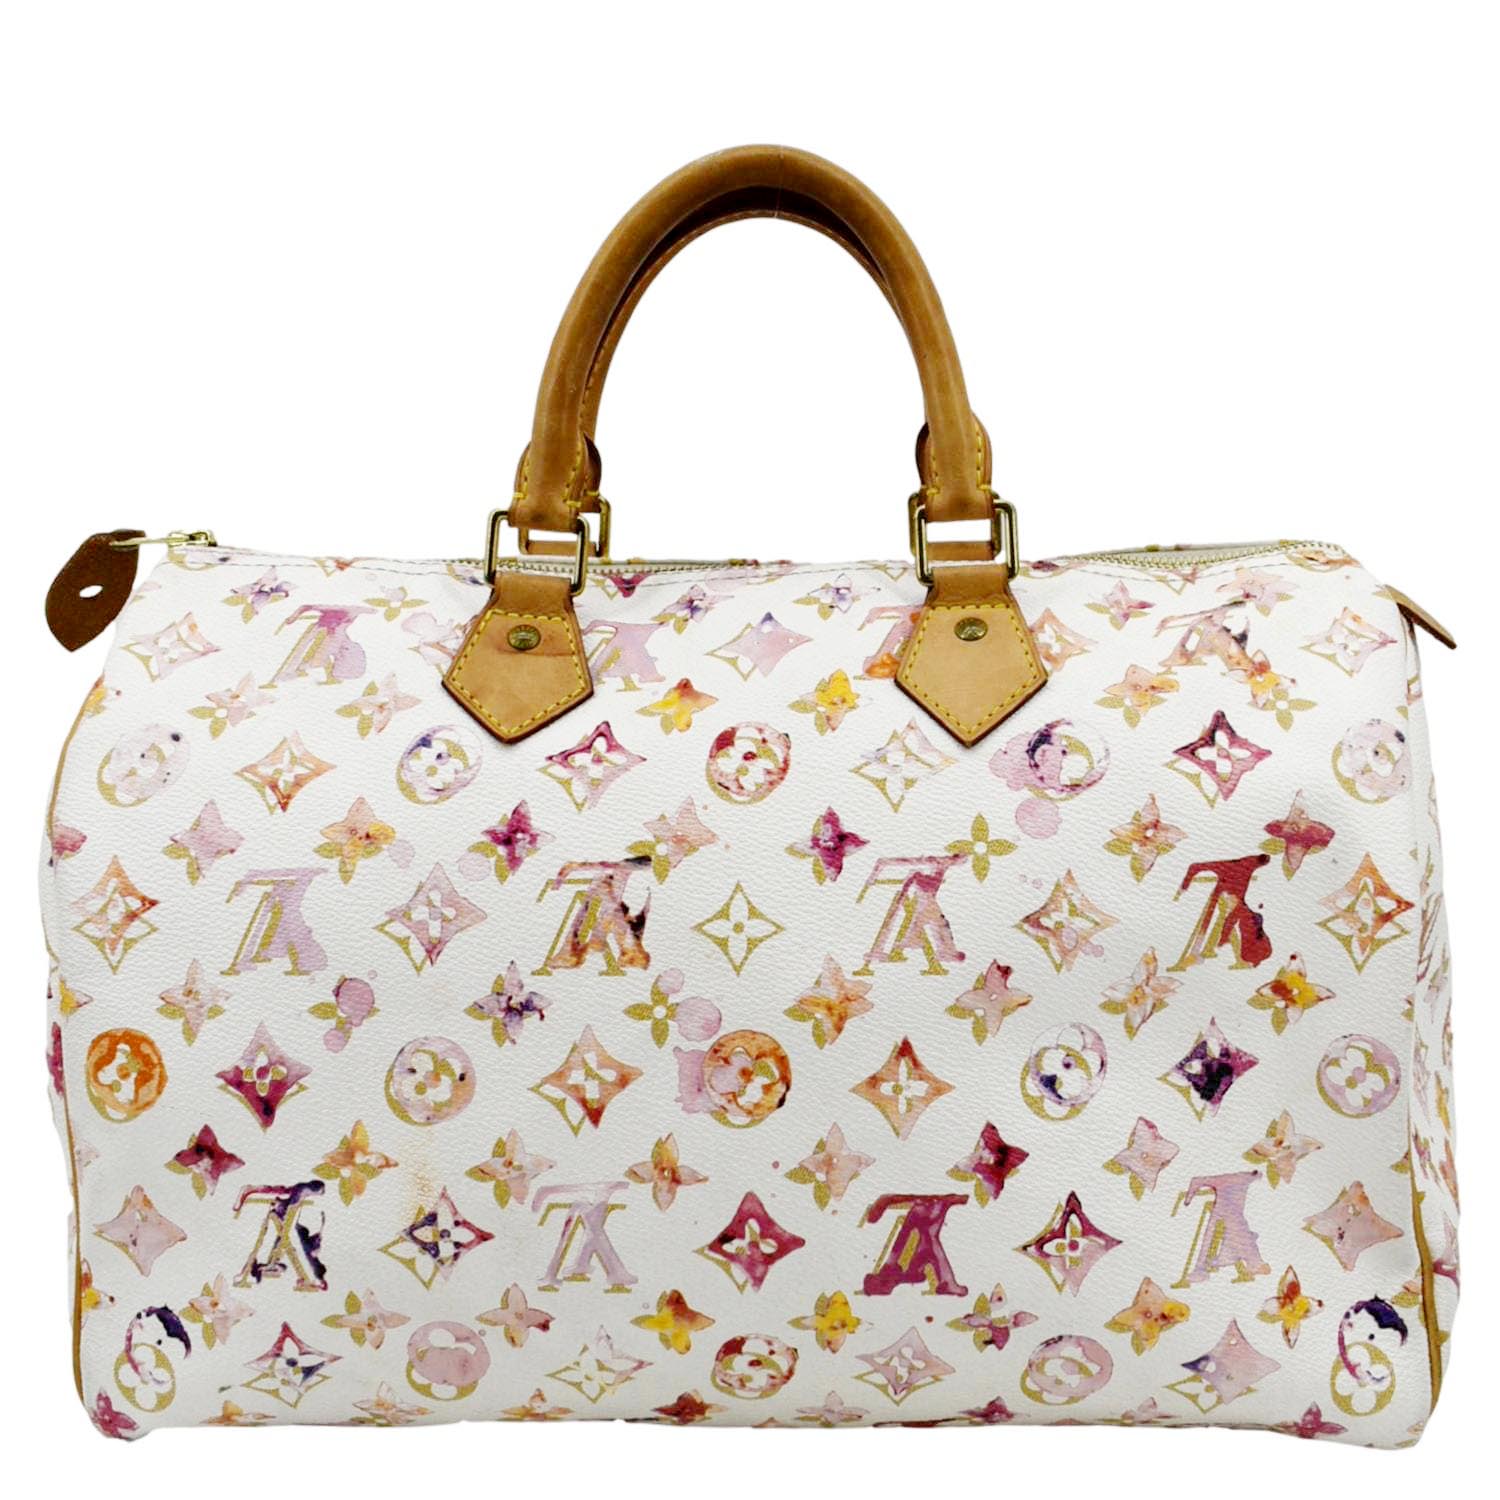 louis vuitton richard prince products for sale